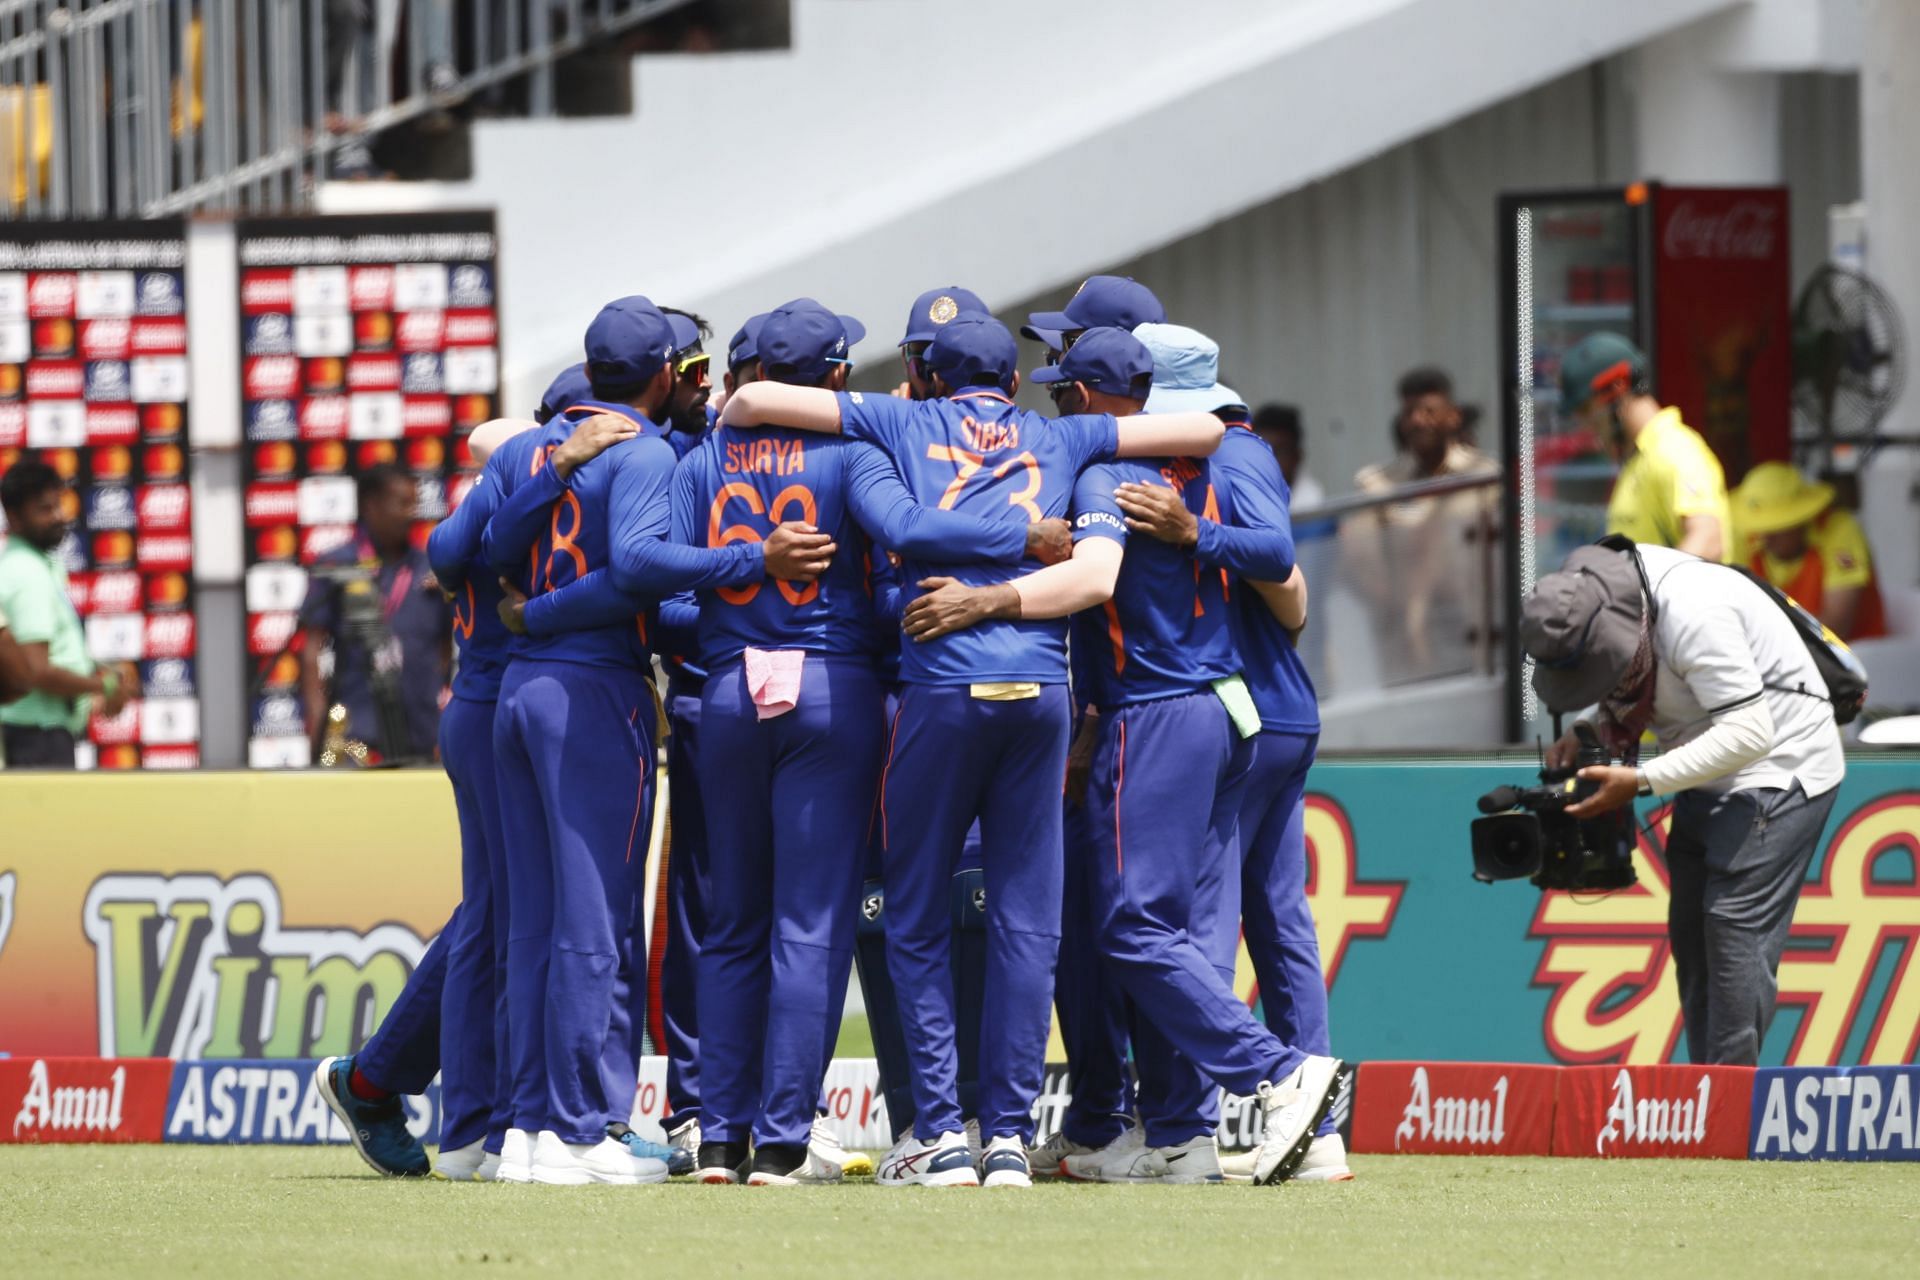 Indian cricket team. (Credits: Getty)